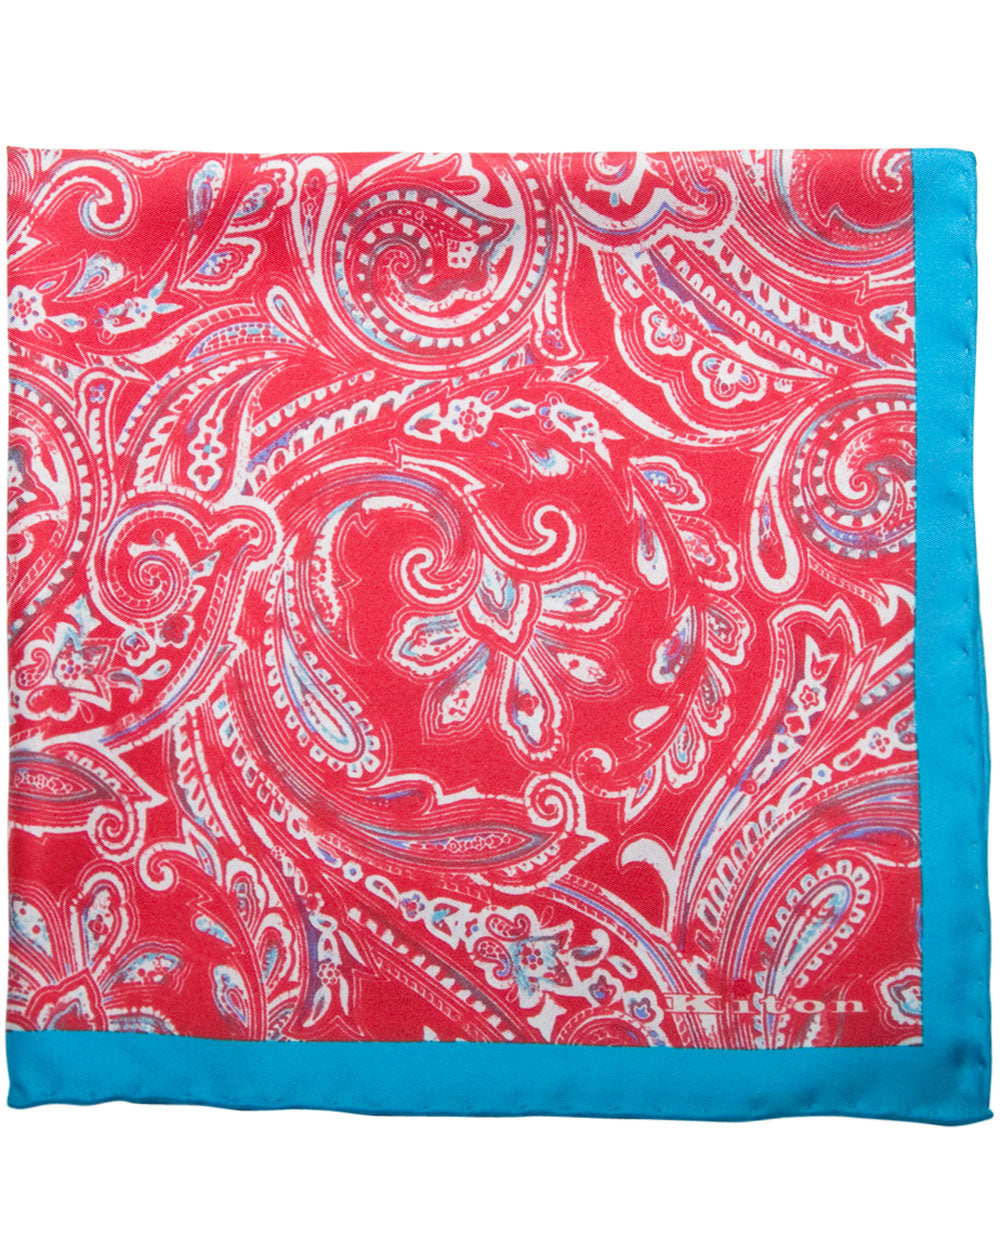 Bright Blue and Red Paisley Silk Pocket Square